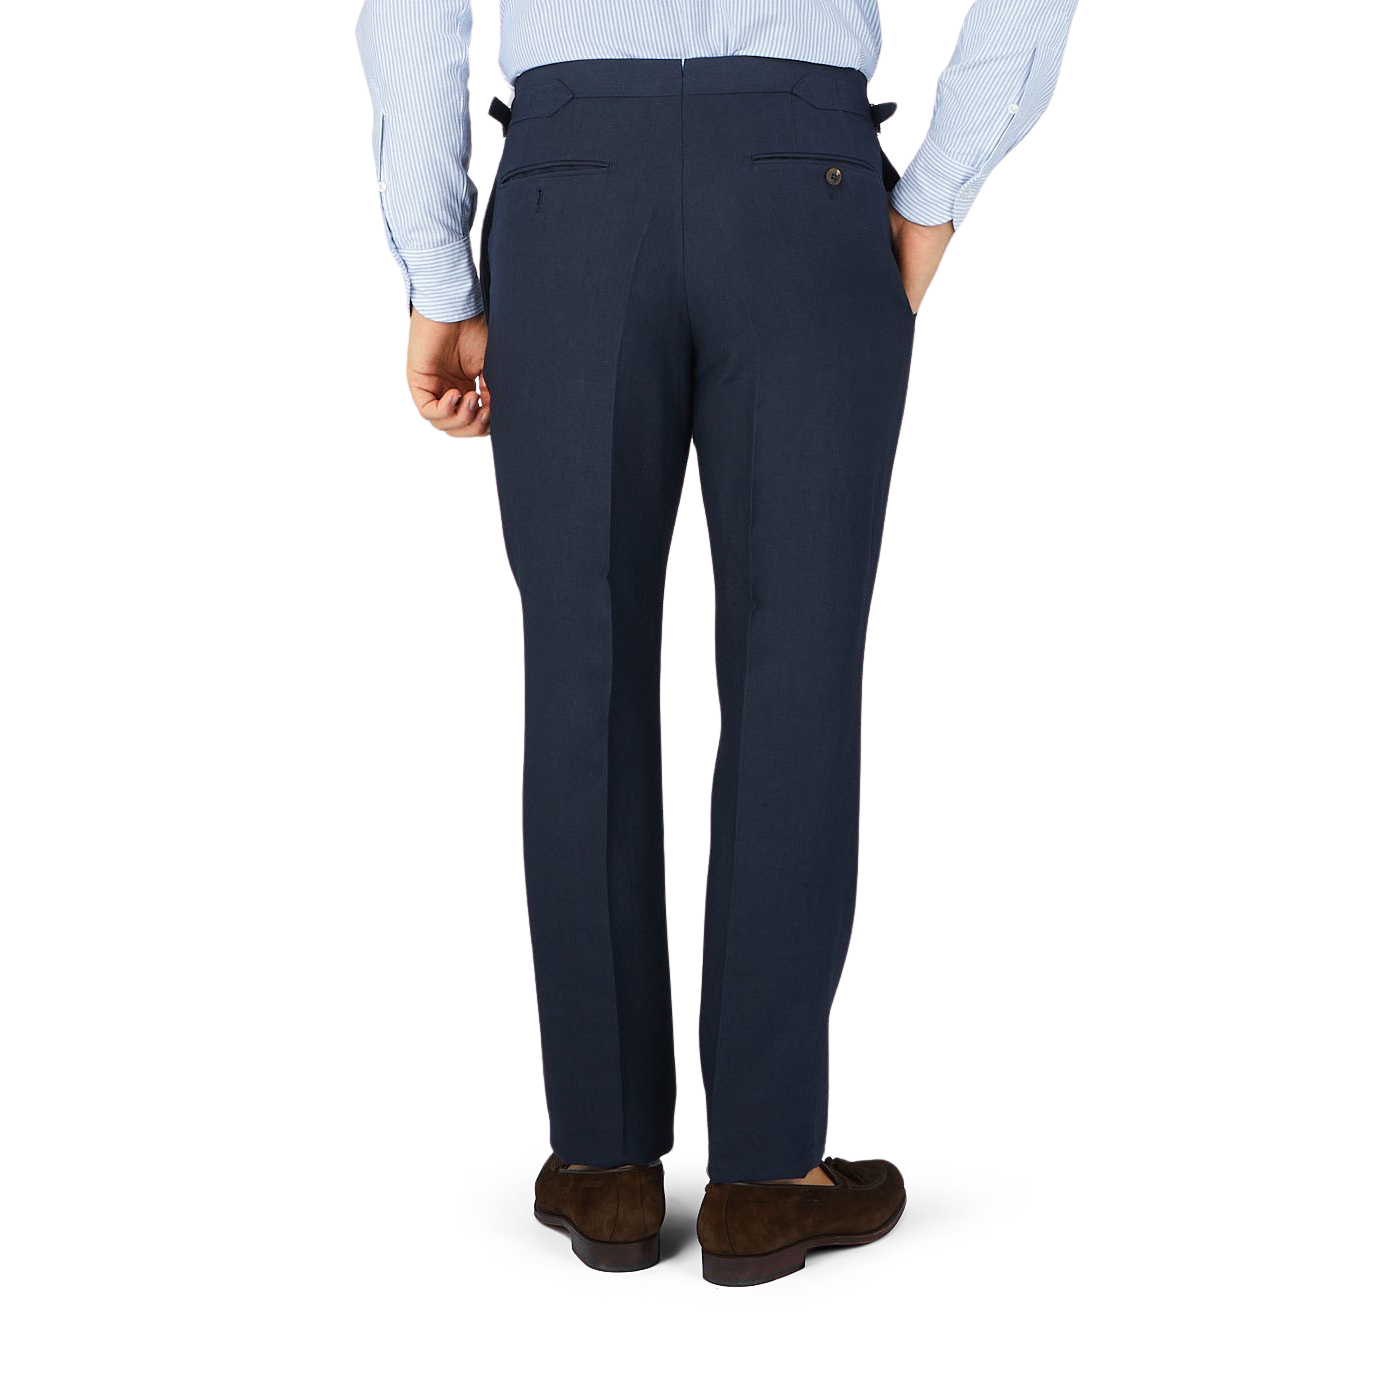 A man in a Baltzar Sartorial navy blue pure linen flat front trousers with a tailored fit.